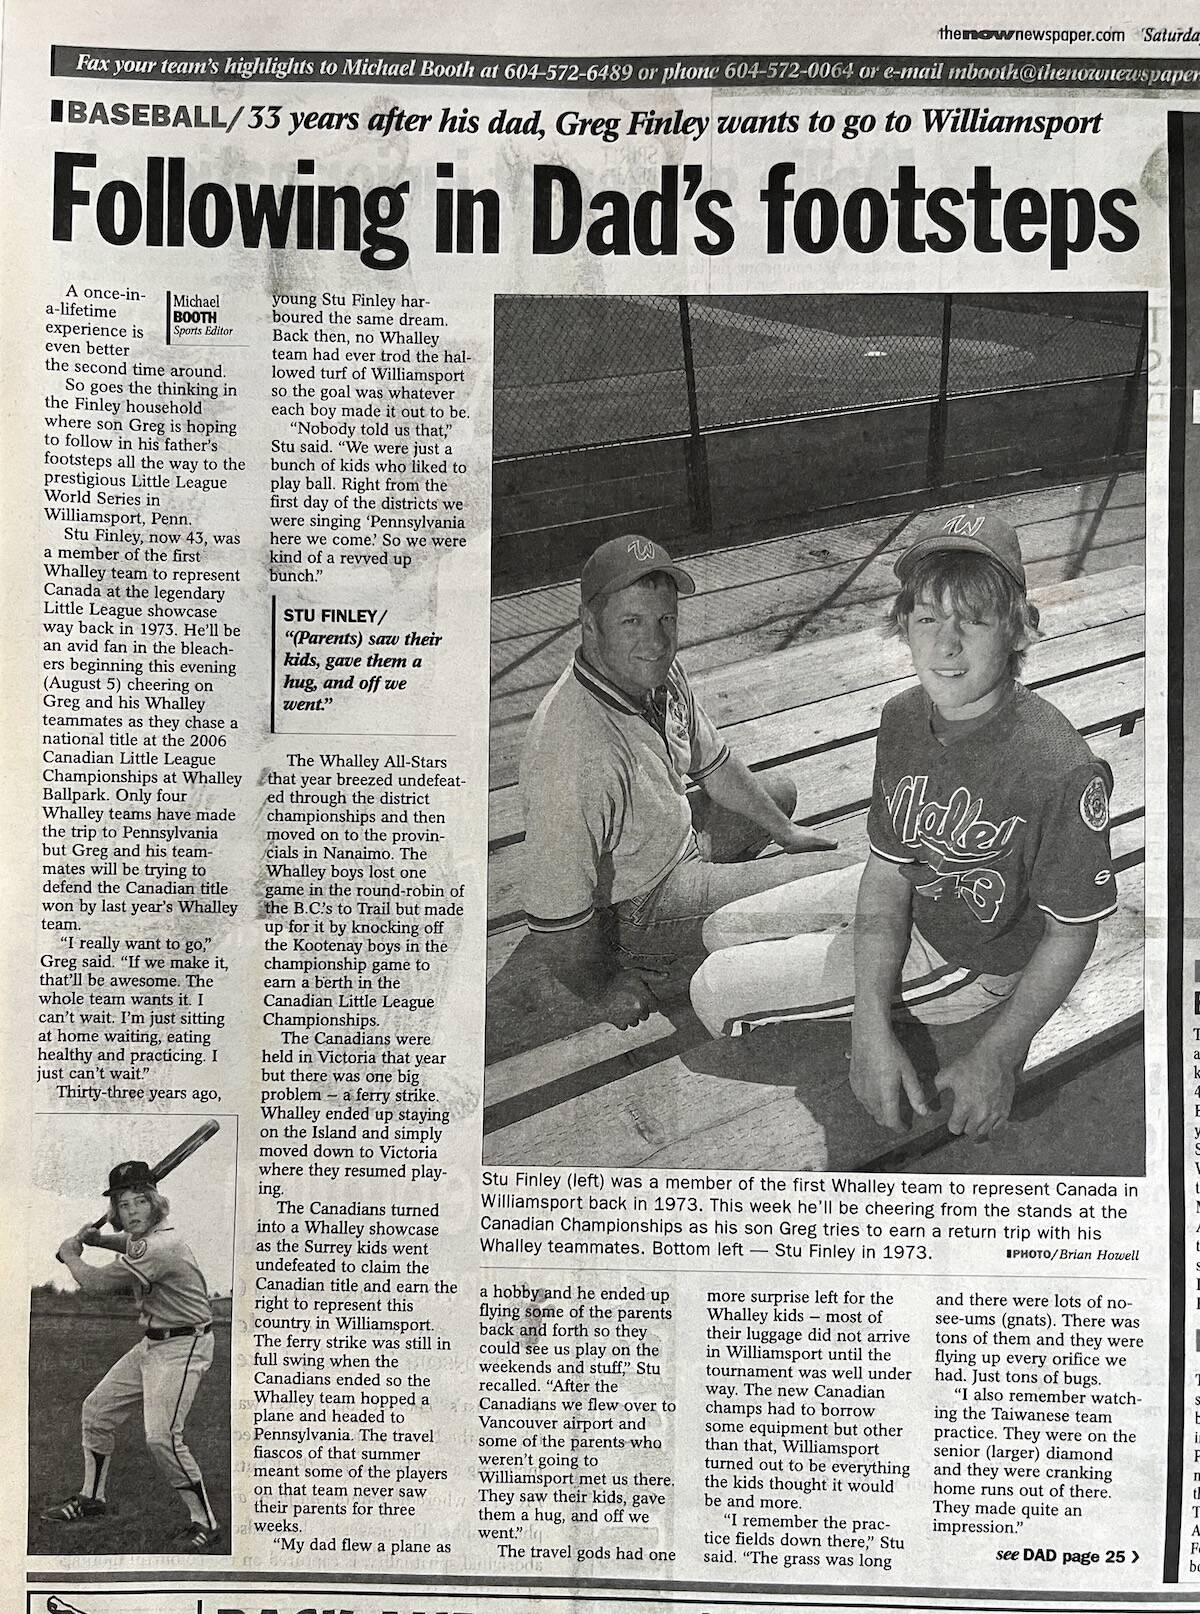 NOW newspaper story from 2006 about Stuart Finley and son Greg.